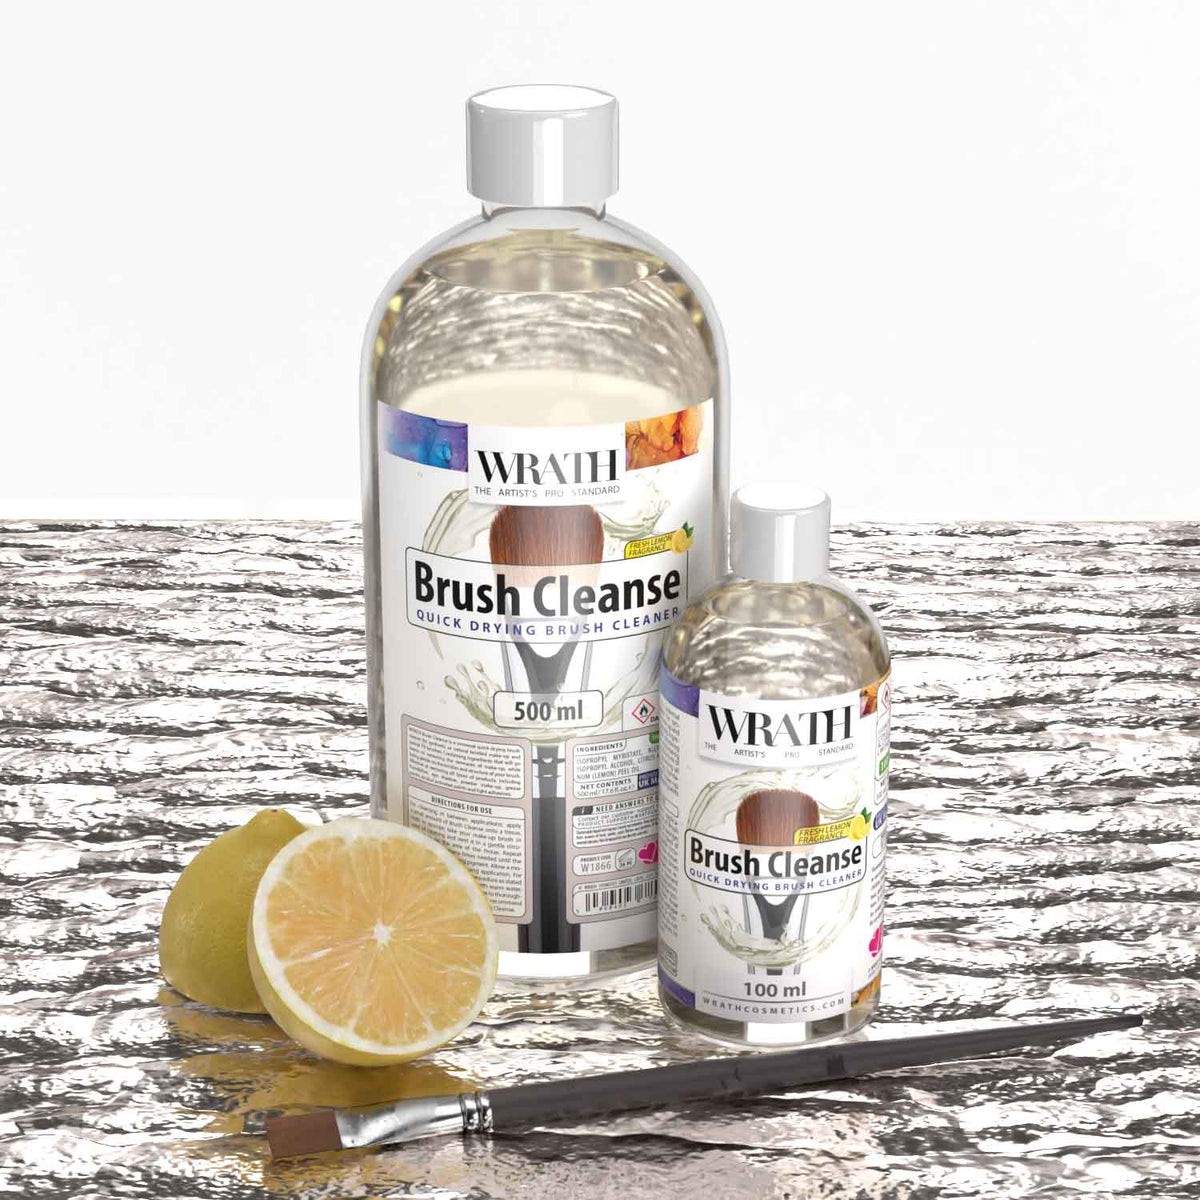 WRATH Brush Cleanse - Quick Drying Brush Cleaner